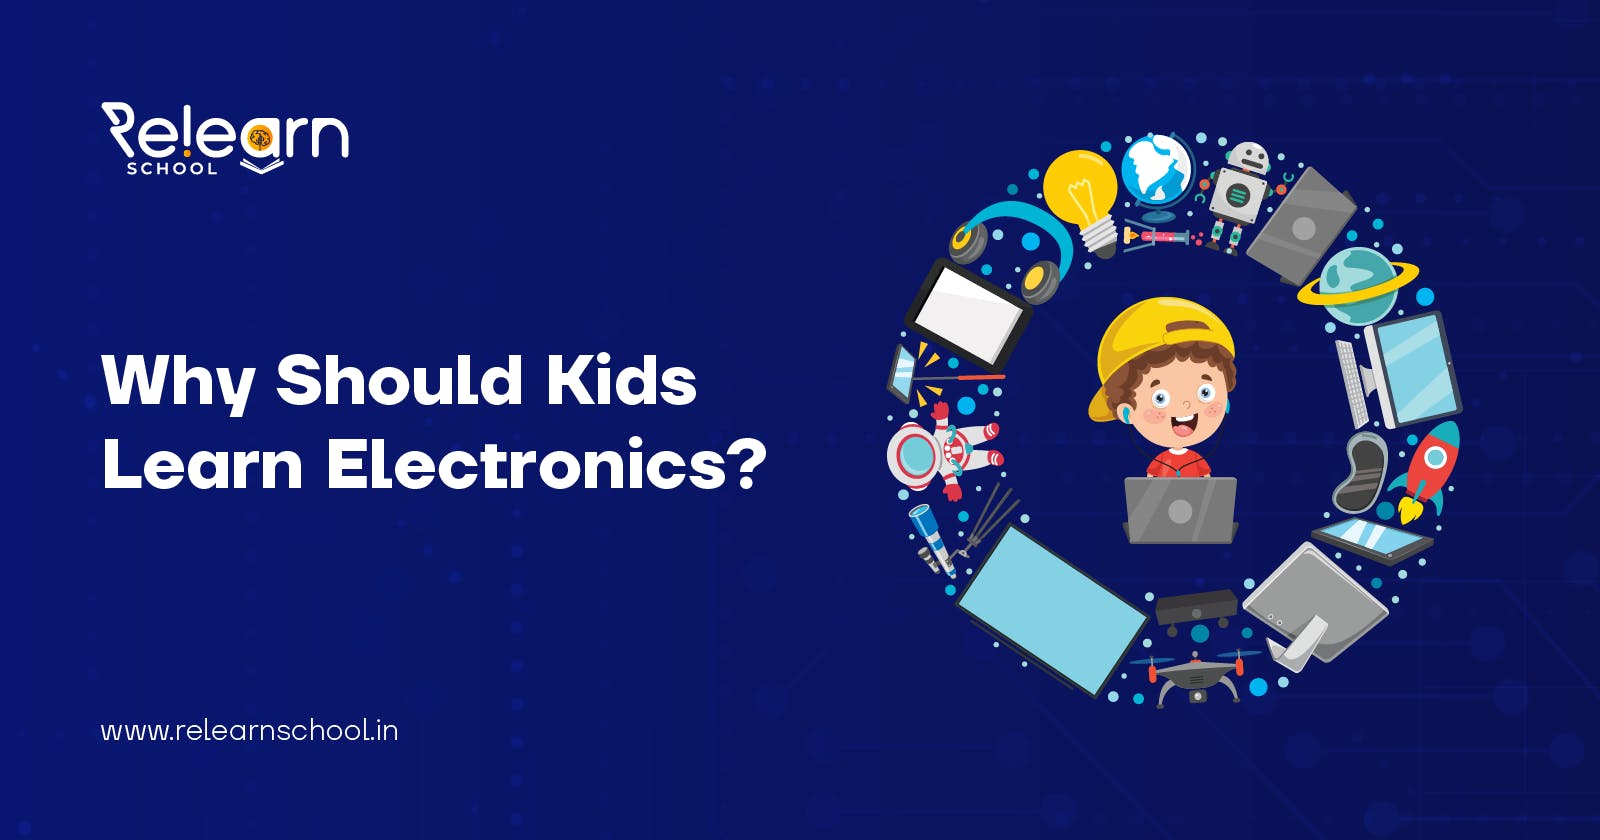 Why Should Kids Learn Electronics?